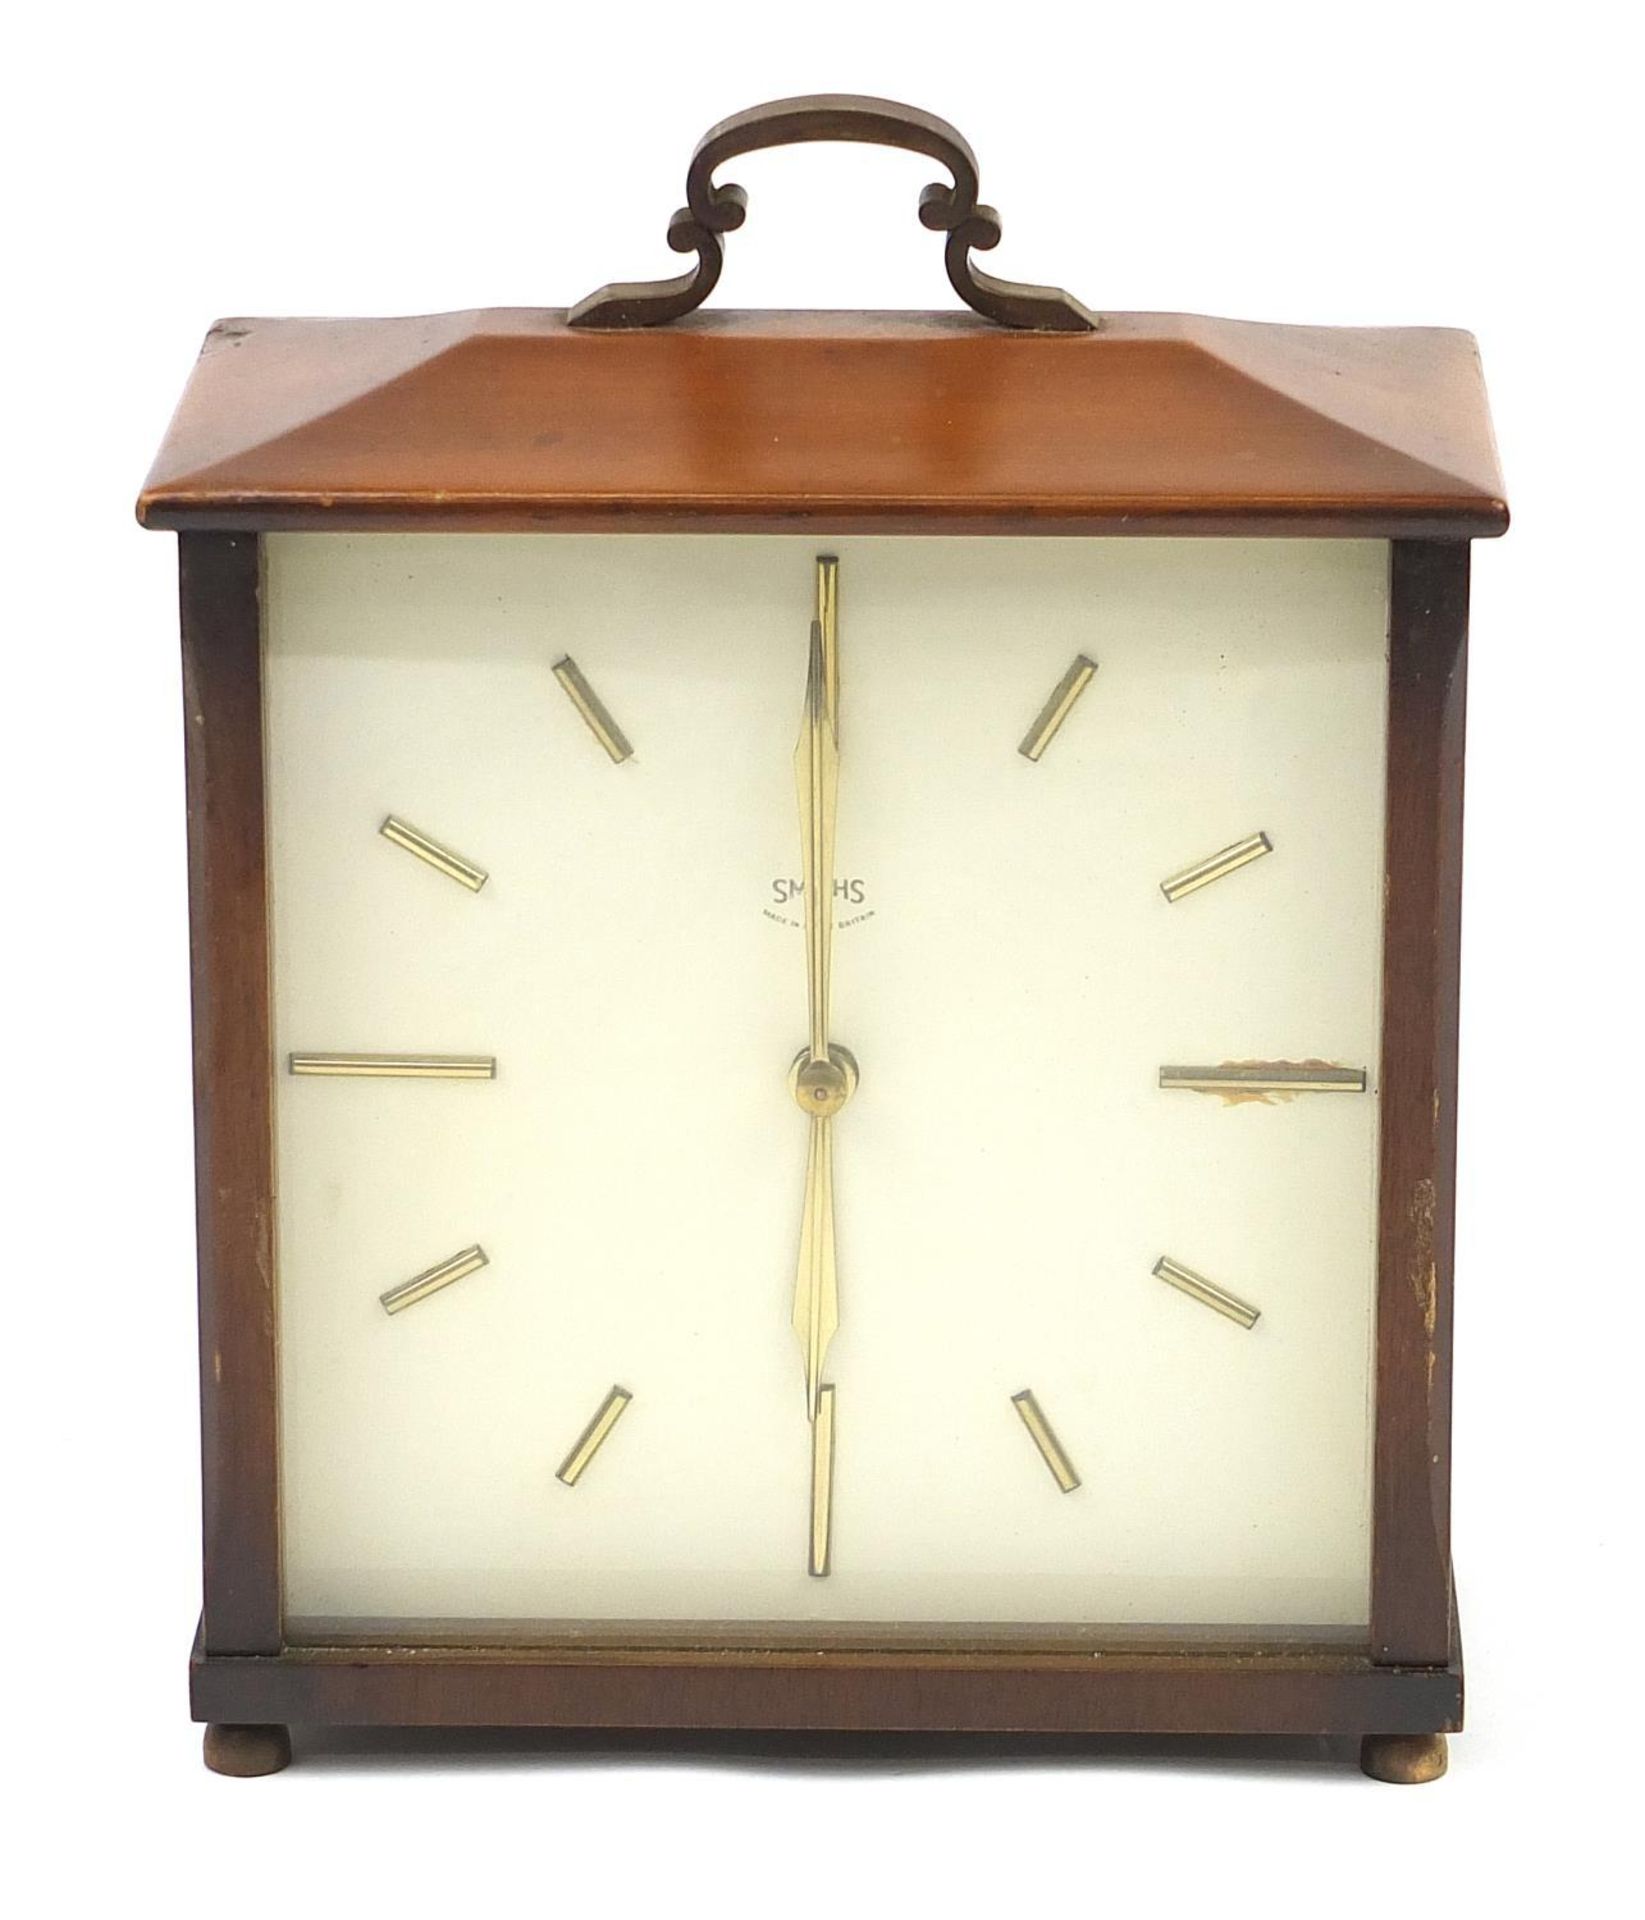 Smith's mahogany cased eight day striking mantle clock, 24cm high - Image 2 of 8